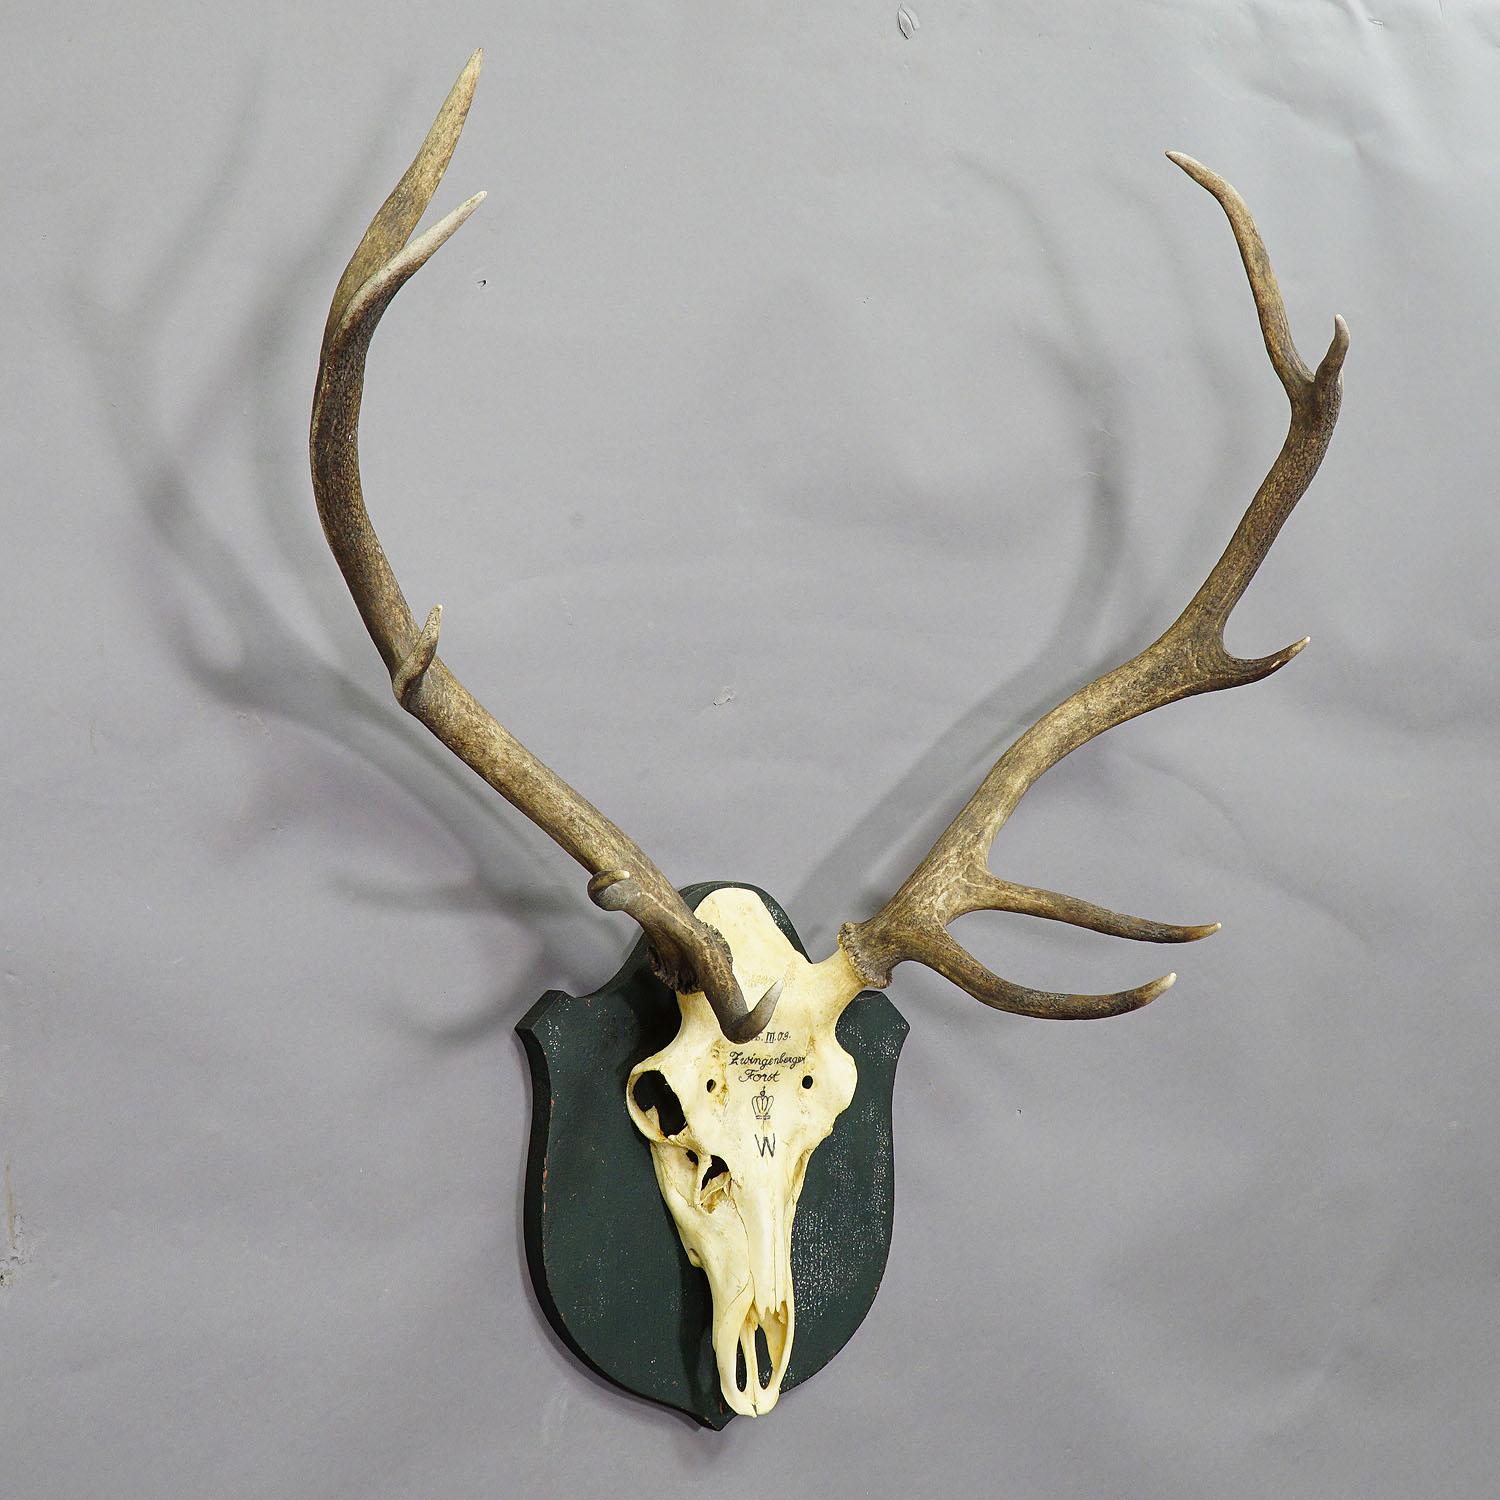 A large uneven 12 pointer Black Forest deer trophy from the palace of Salem in south Germany. Shoot by a member of the lordly family of Baden in 1903. Handwritten inscriptions on the skull with, place of the hunt, family crest and date. Mounted on a